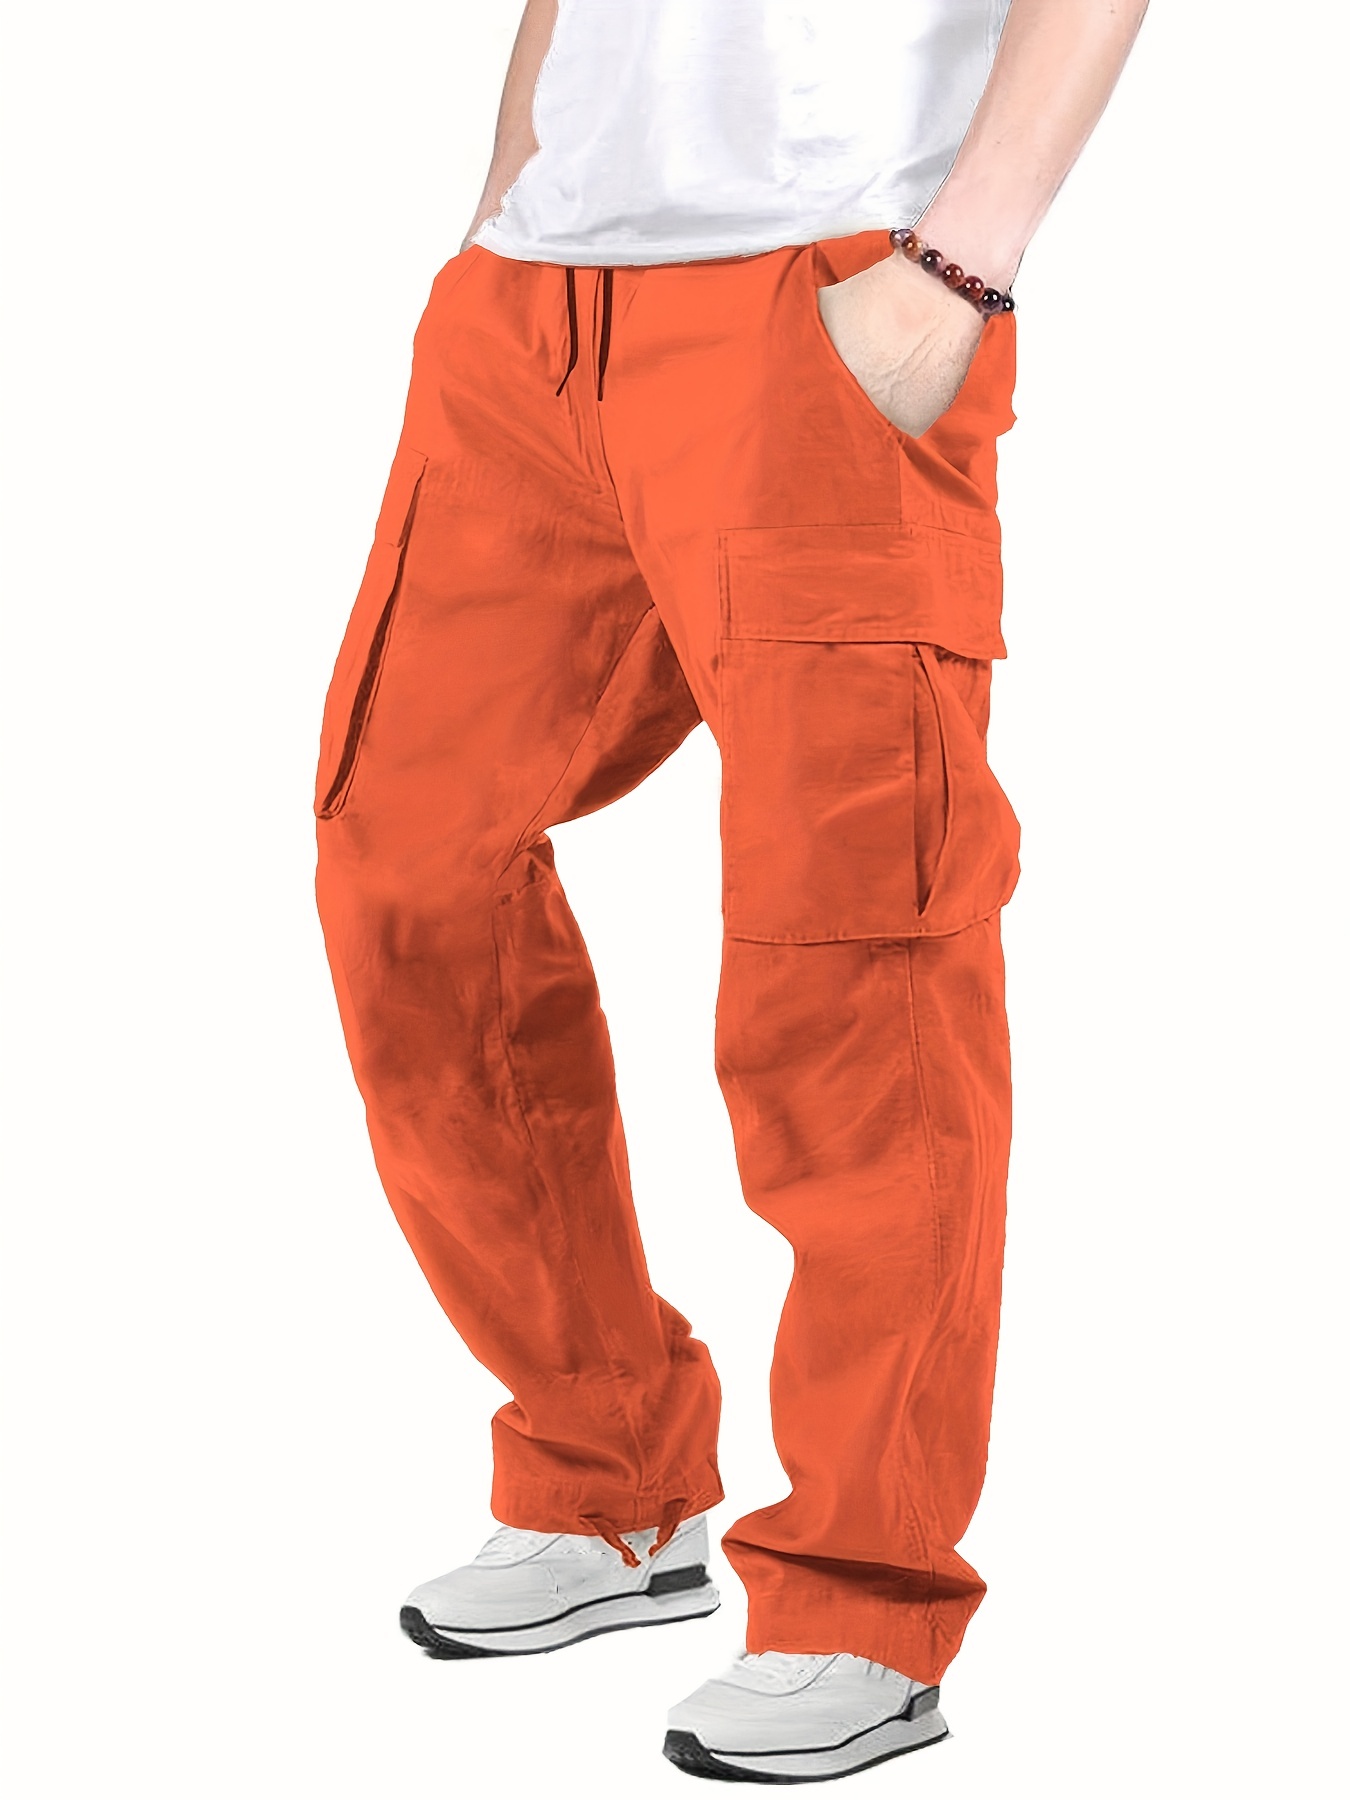 Hndudnff Men's Cargo Pants Loose Straight Multi Pocket Pants Solid Work  Jogger Cotton Casual Trousers AmryGN EU Size S at  Men's Clothing  store